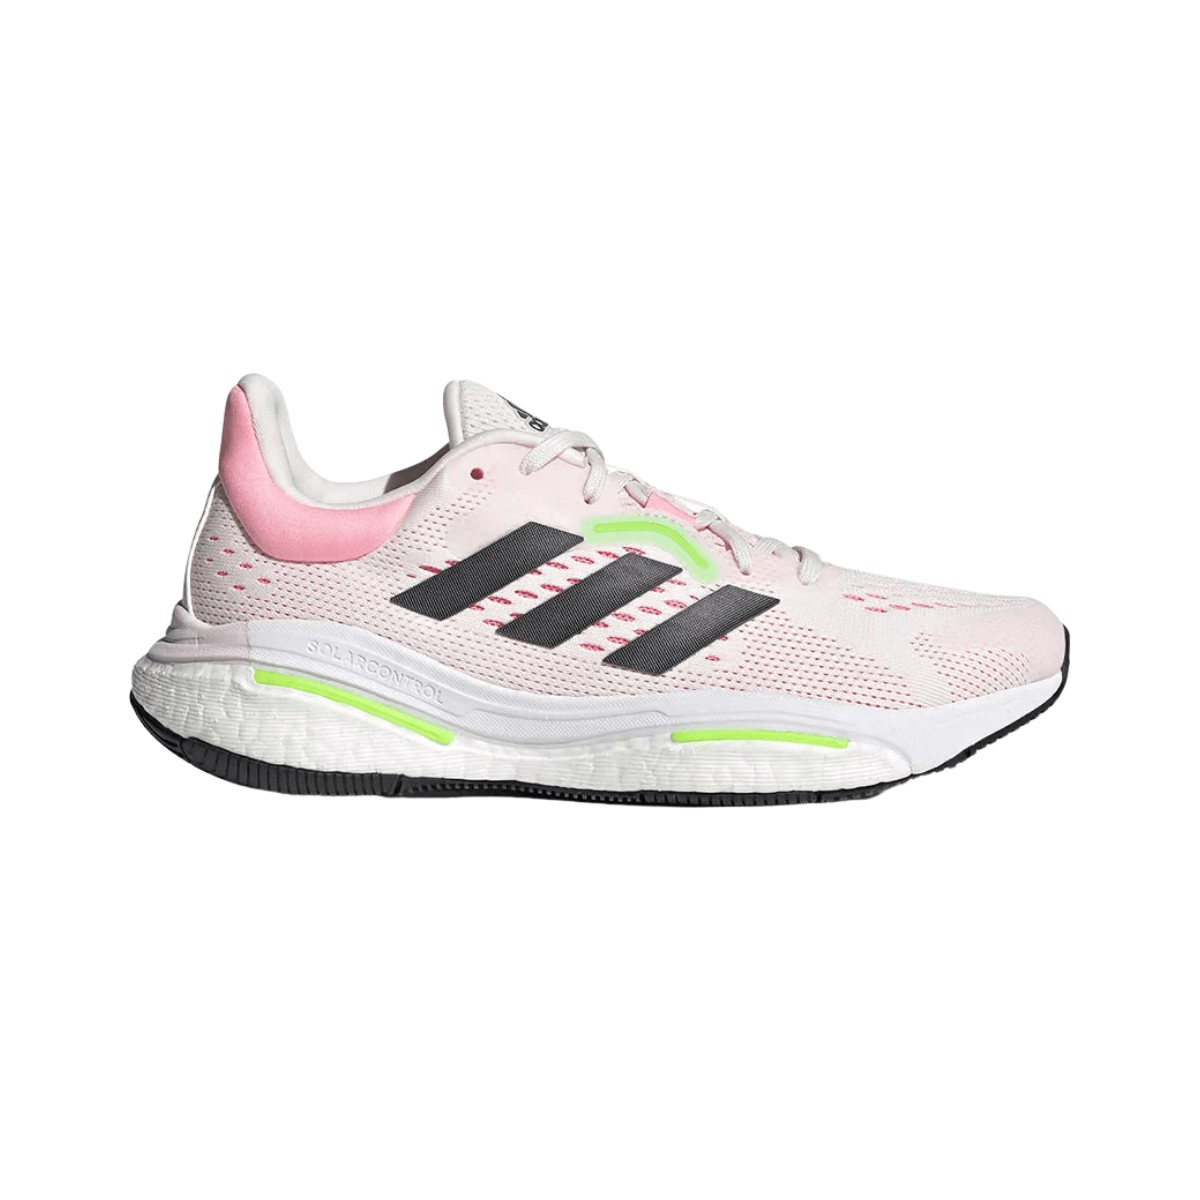 Adidas Solar Control Women´s Shoes Pink White AW22, Size UK 5